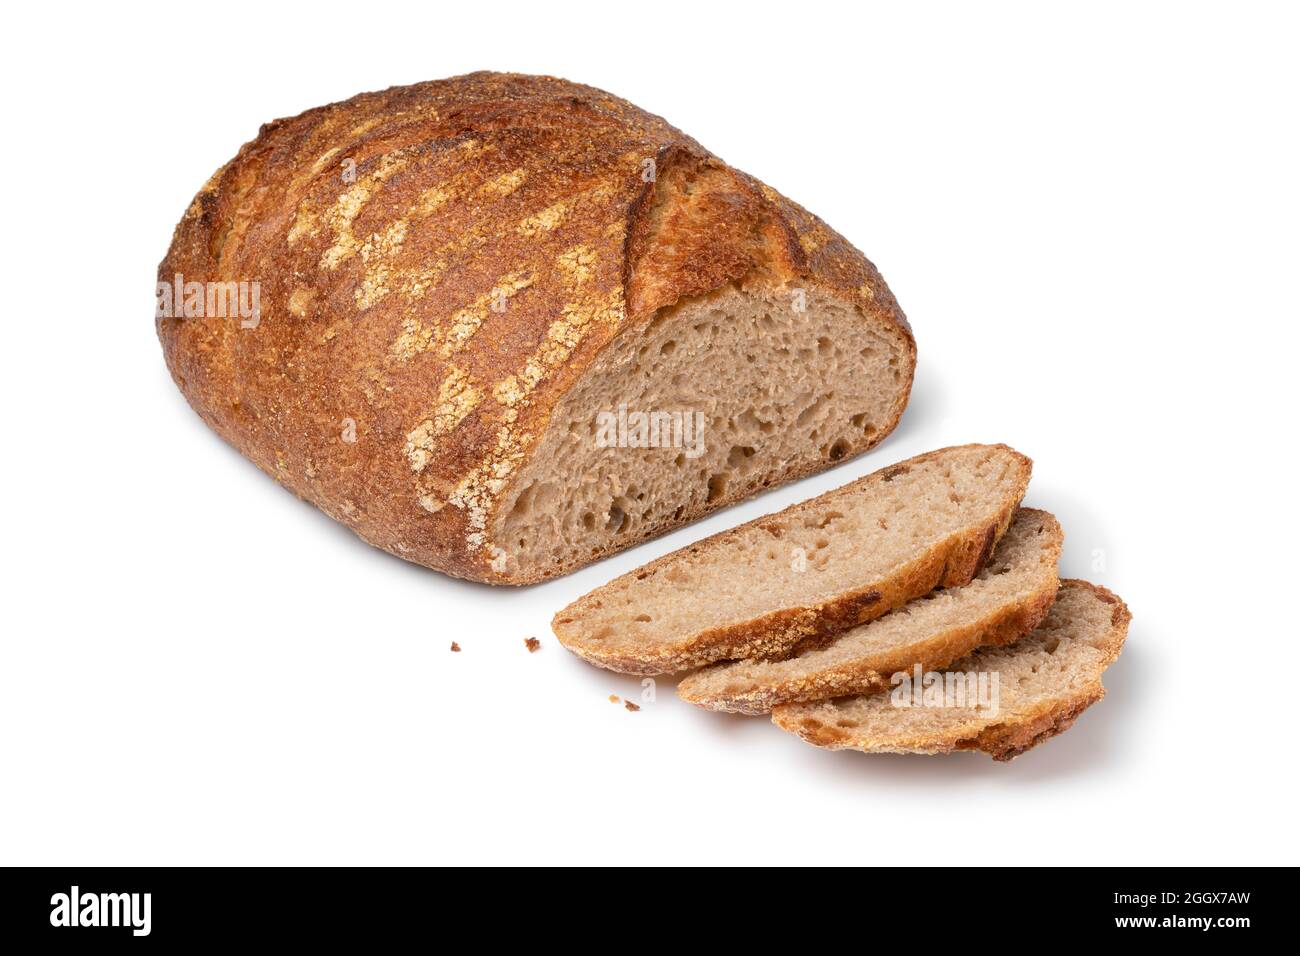 Sliced whole fresh baked German dinkel wheat bread isolated on white background Stock Photo